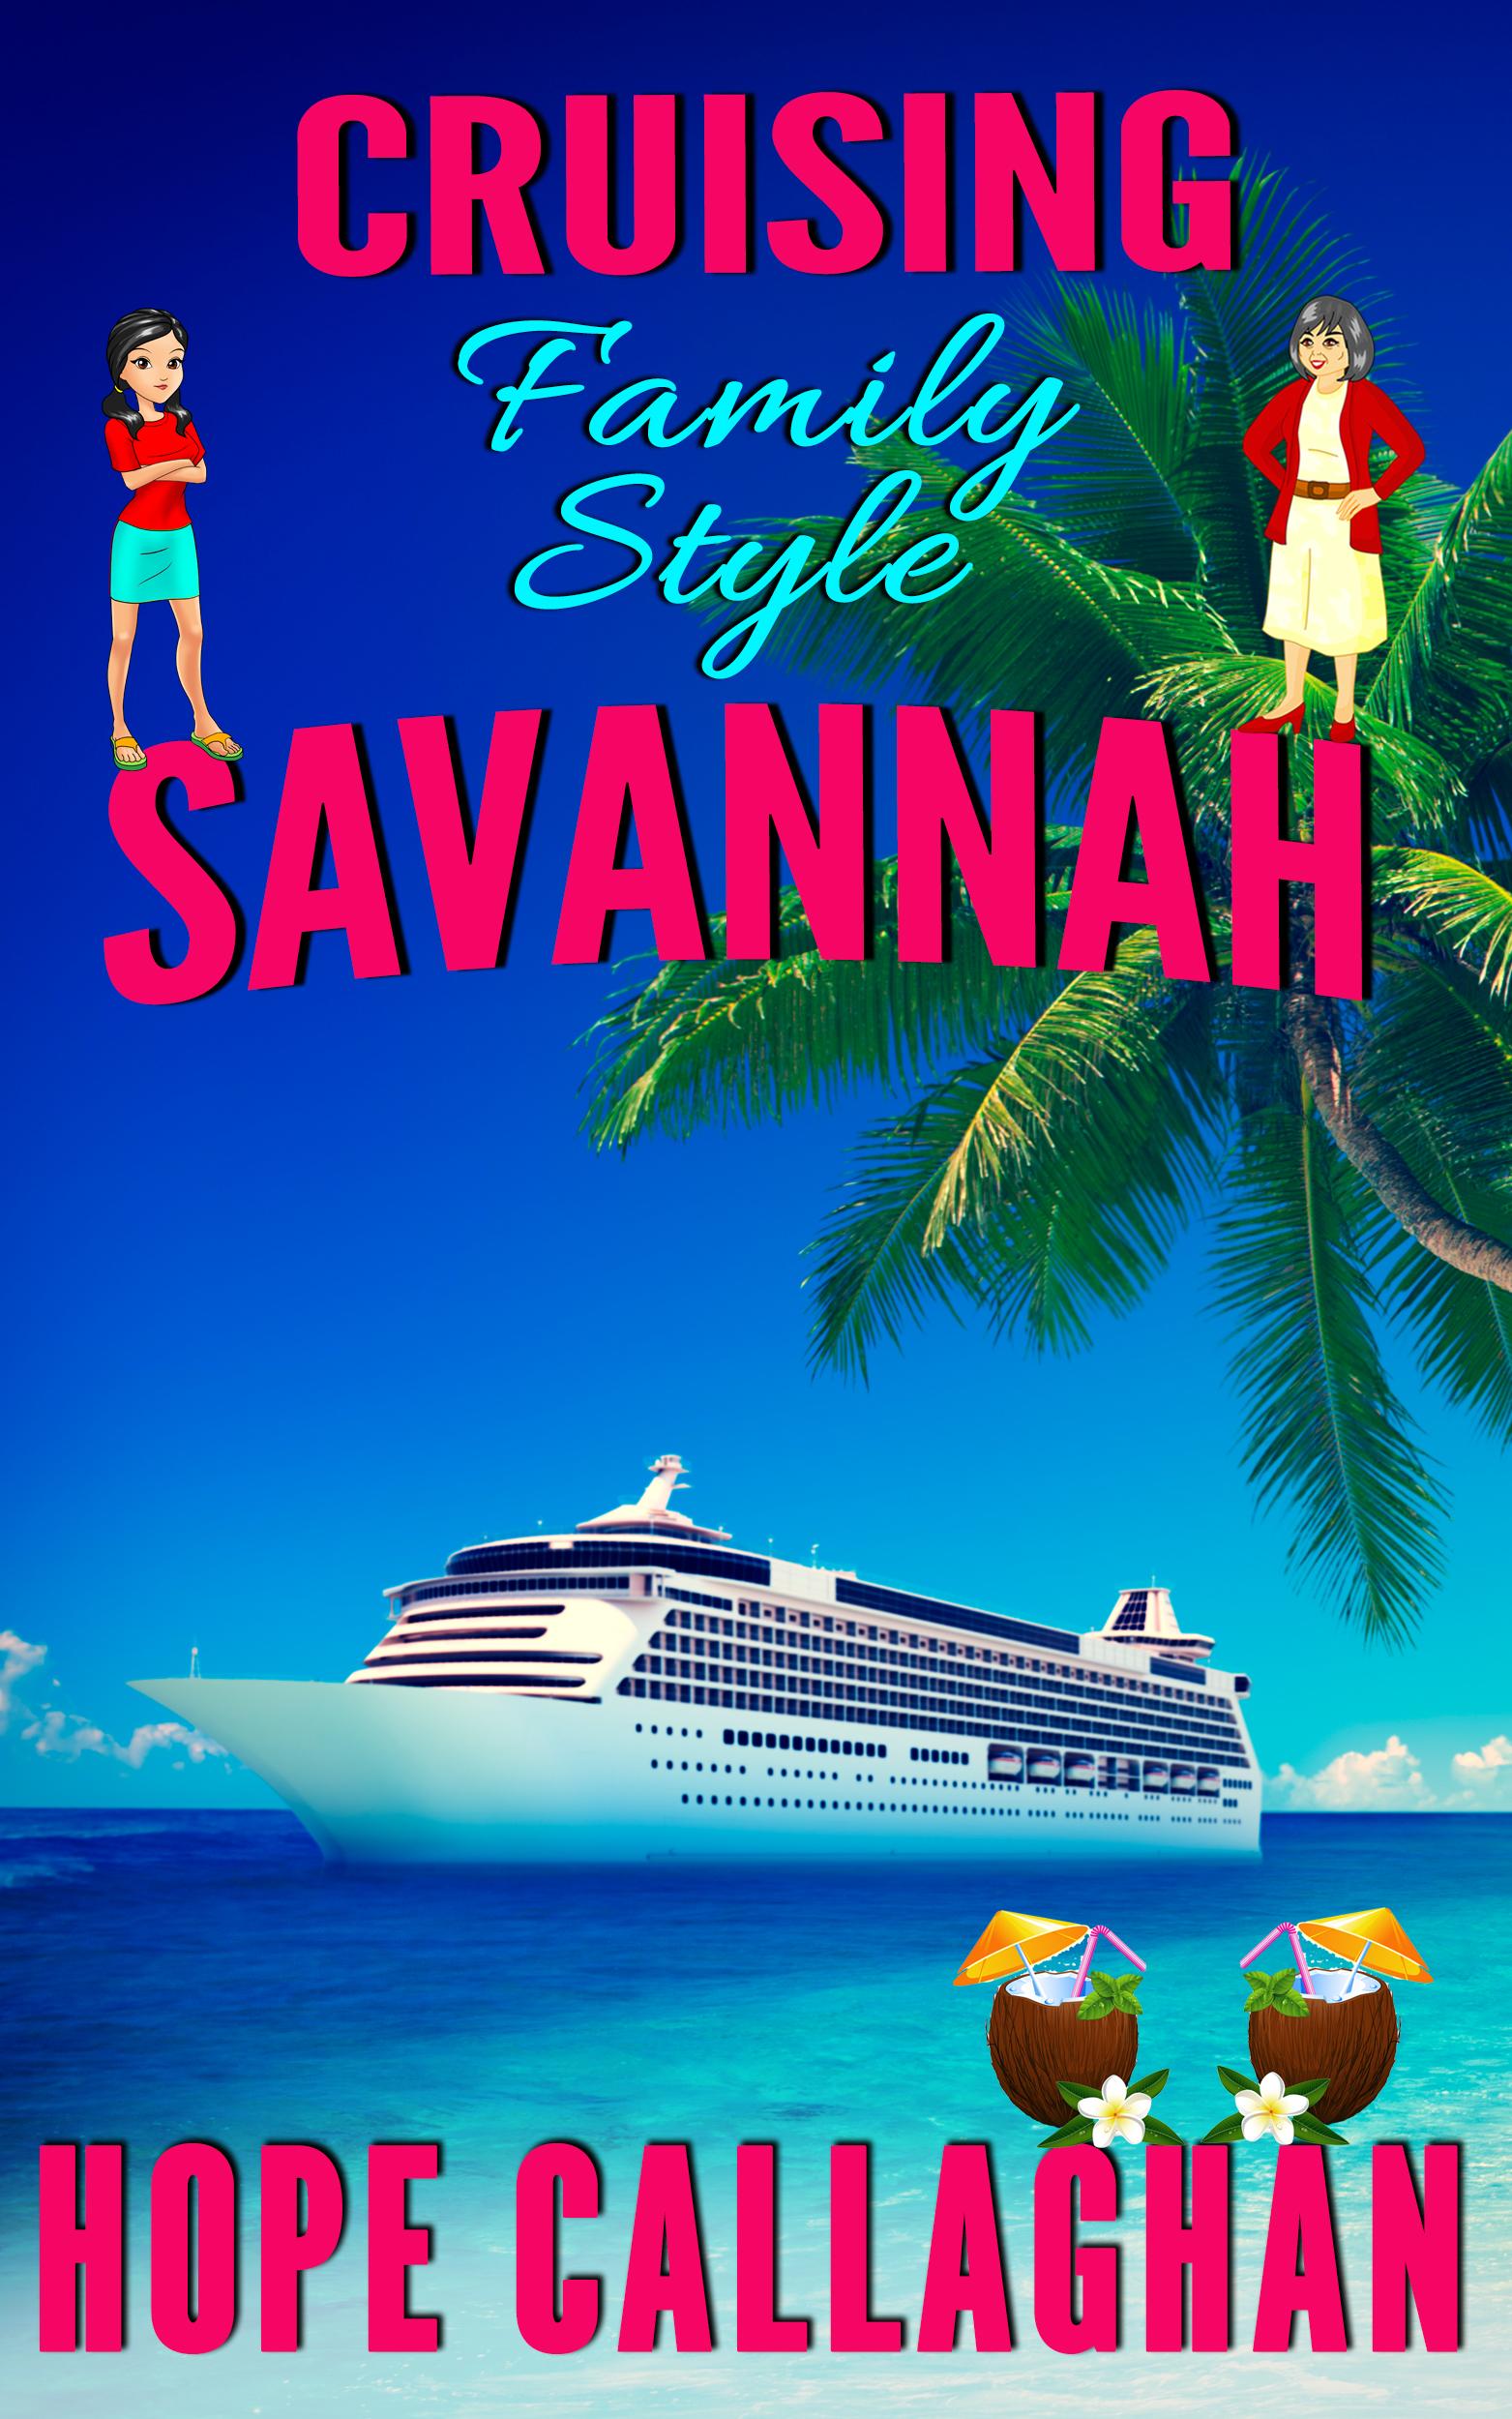 Get the brand new Made in Savannah Mystery   "Cruising Family Style,"  While It's On Sale!